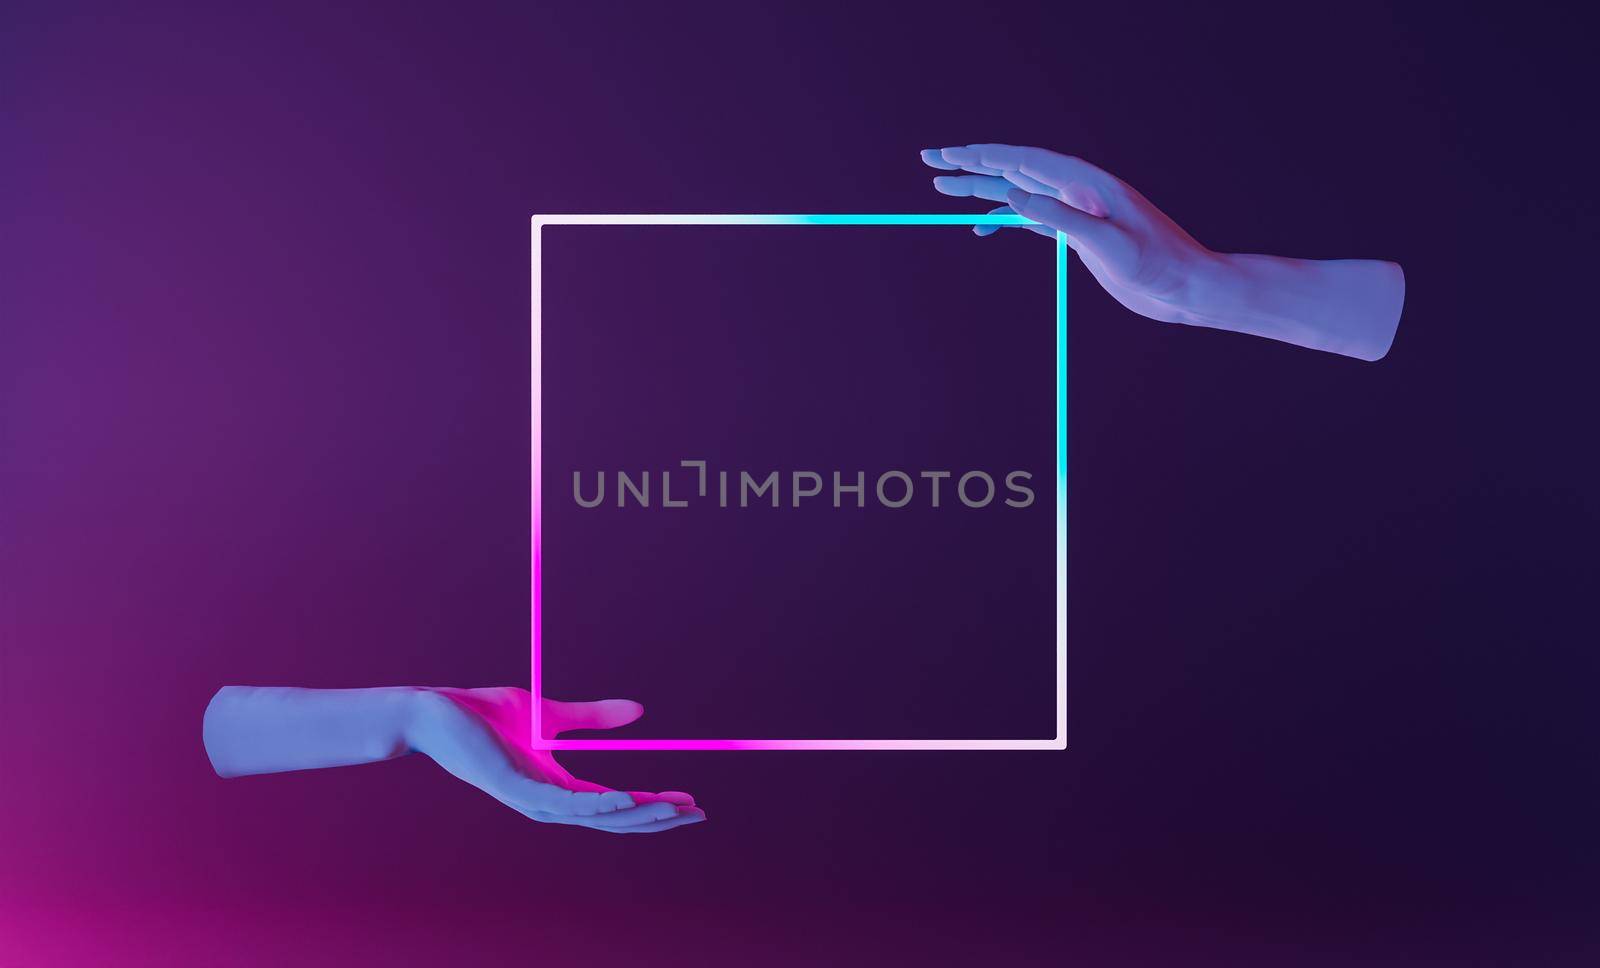 frame for presentation of design or product held by hands in an abstract scene with neon lighting. 3d render